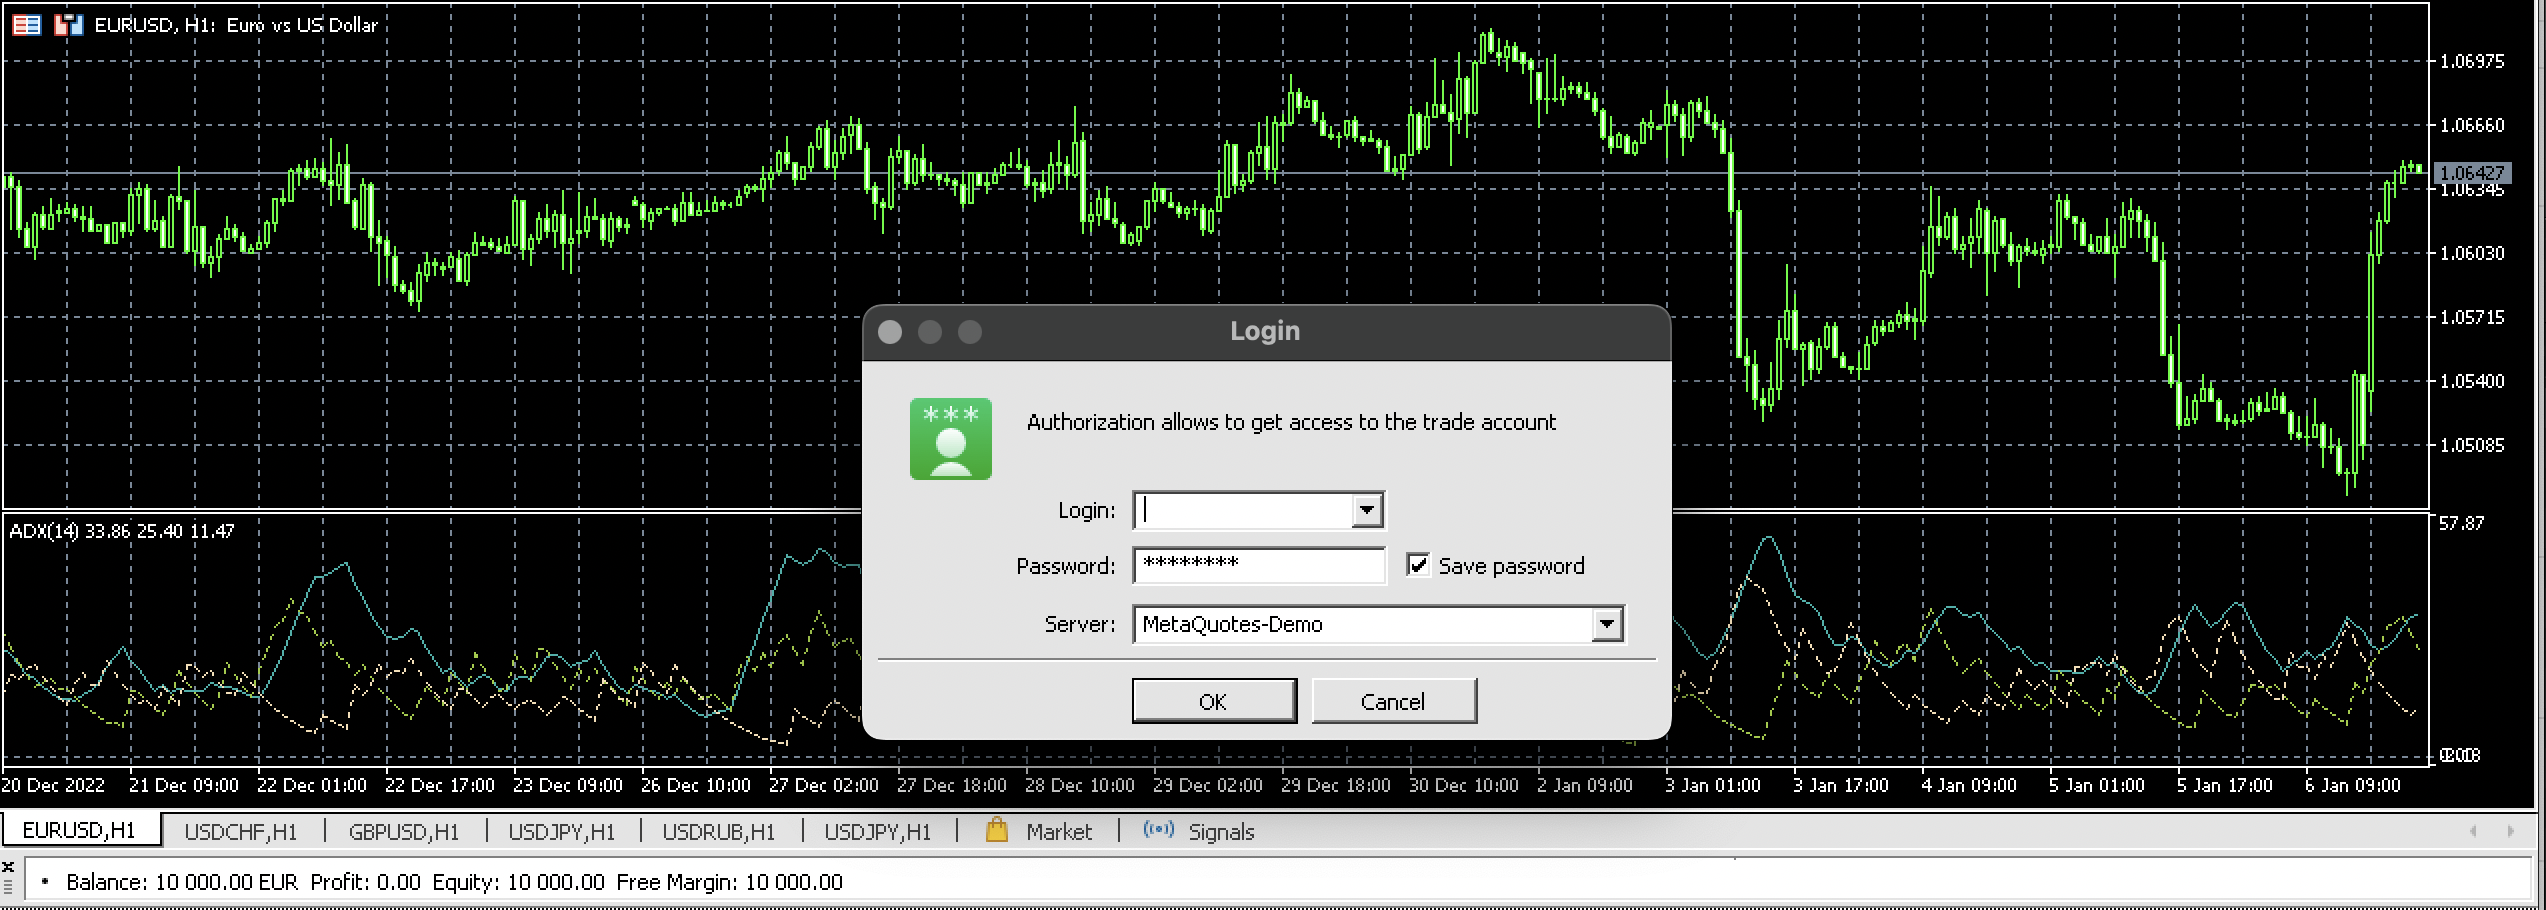 How to log in on the MetaTrader 5